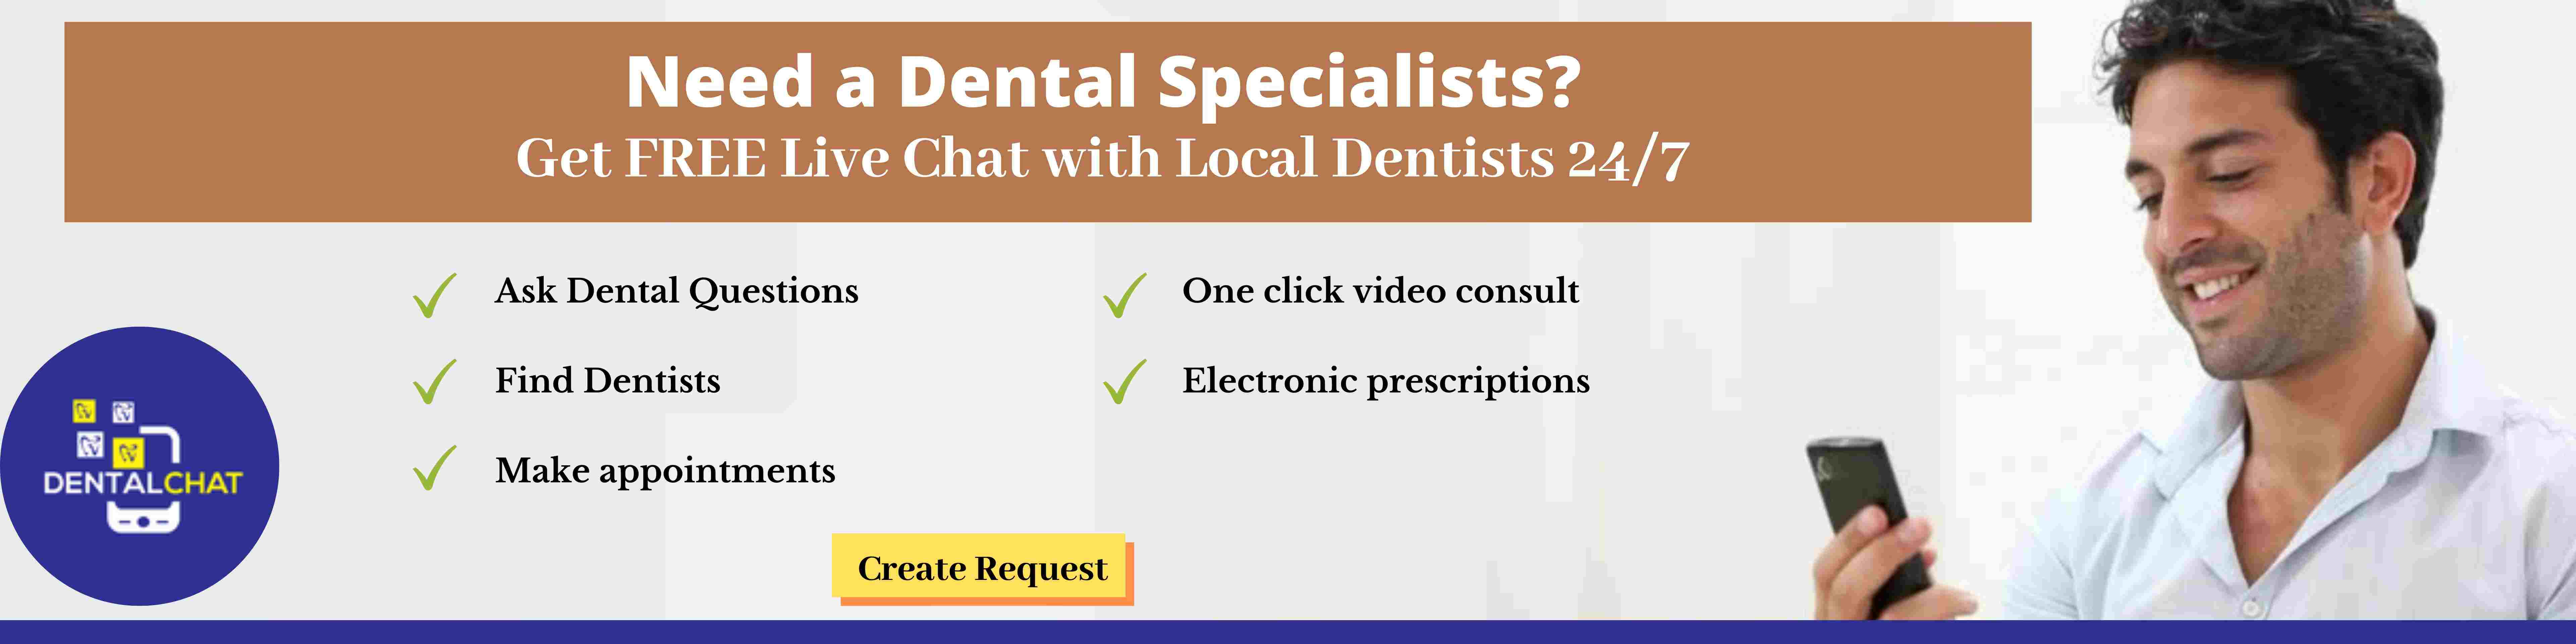 Dental Specialties Chat, Local General Dentistry Information Online Blog,  Cosmetic Dentists Chat Online